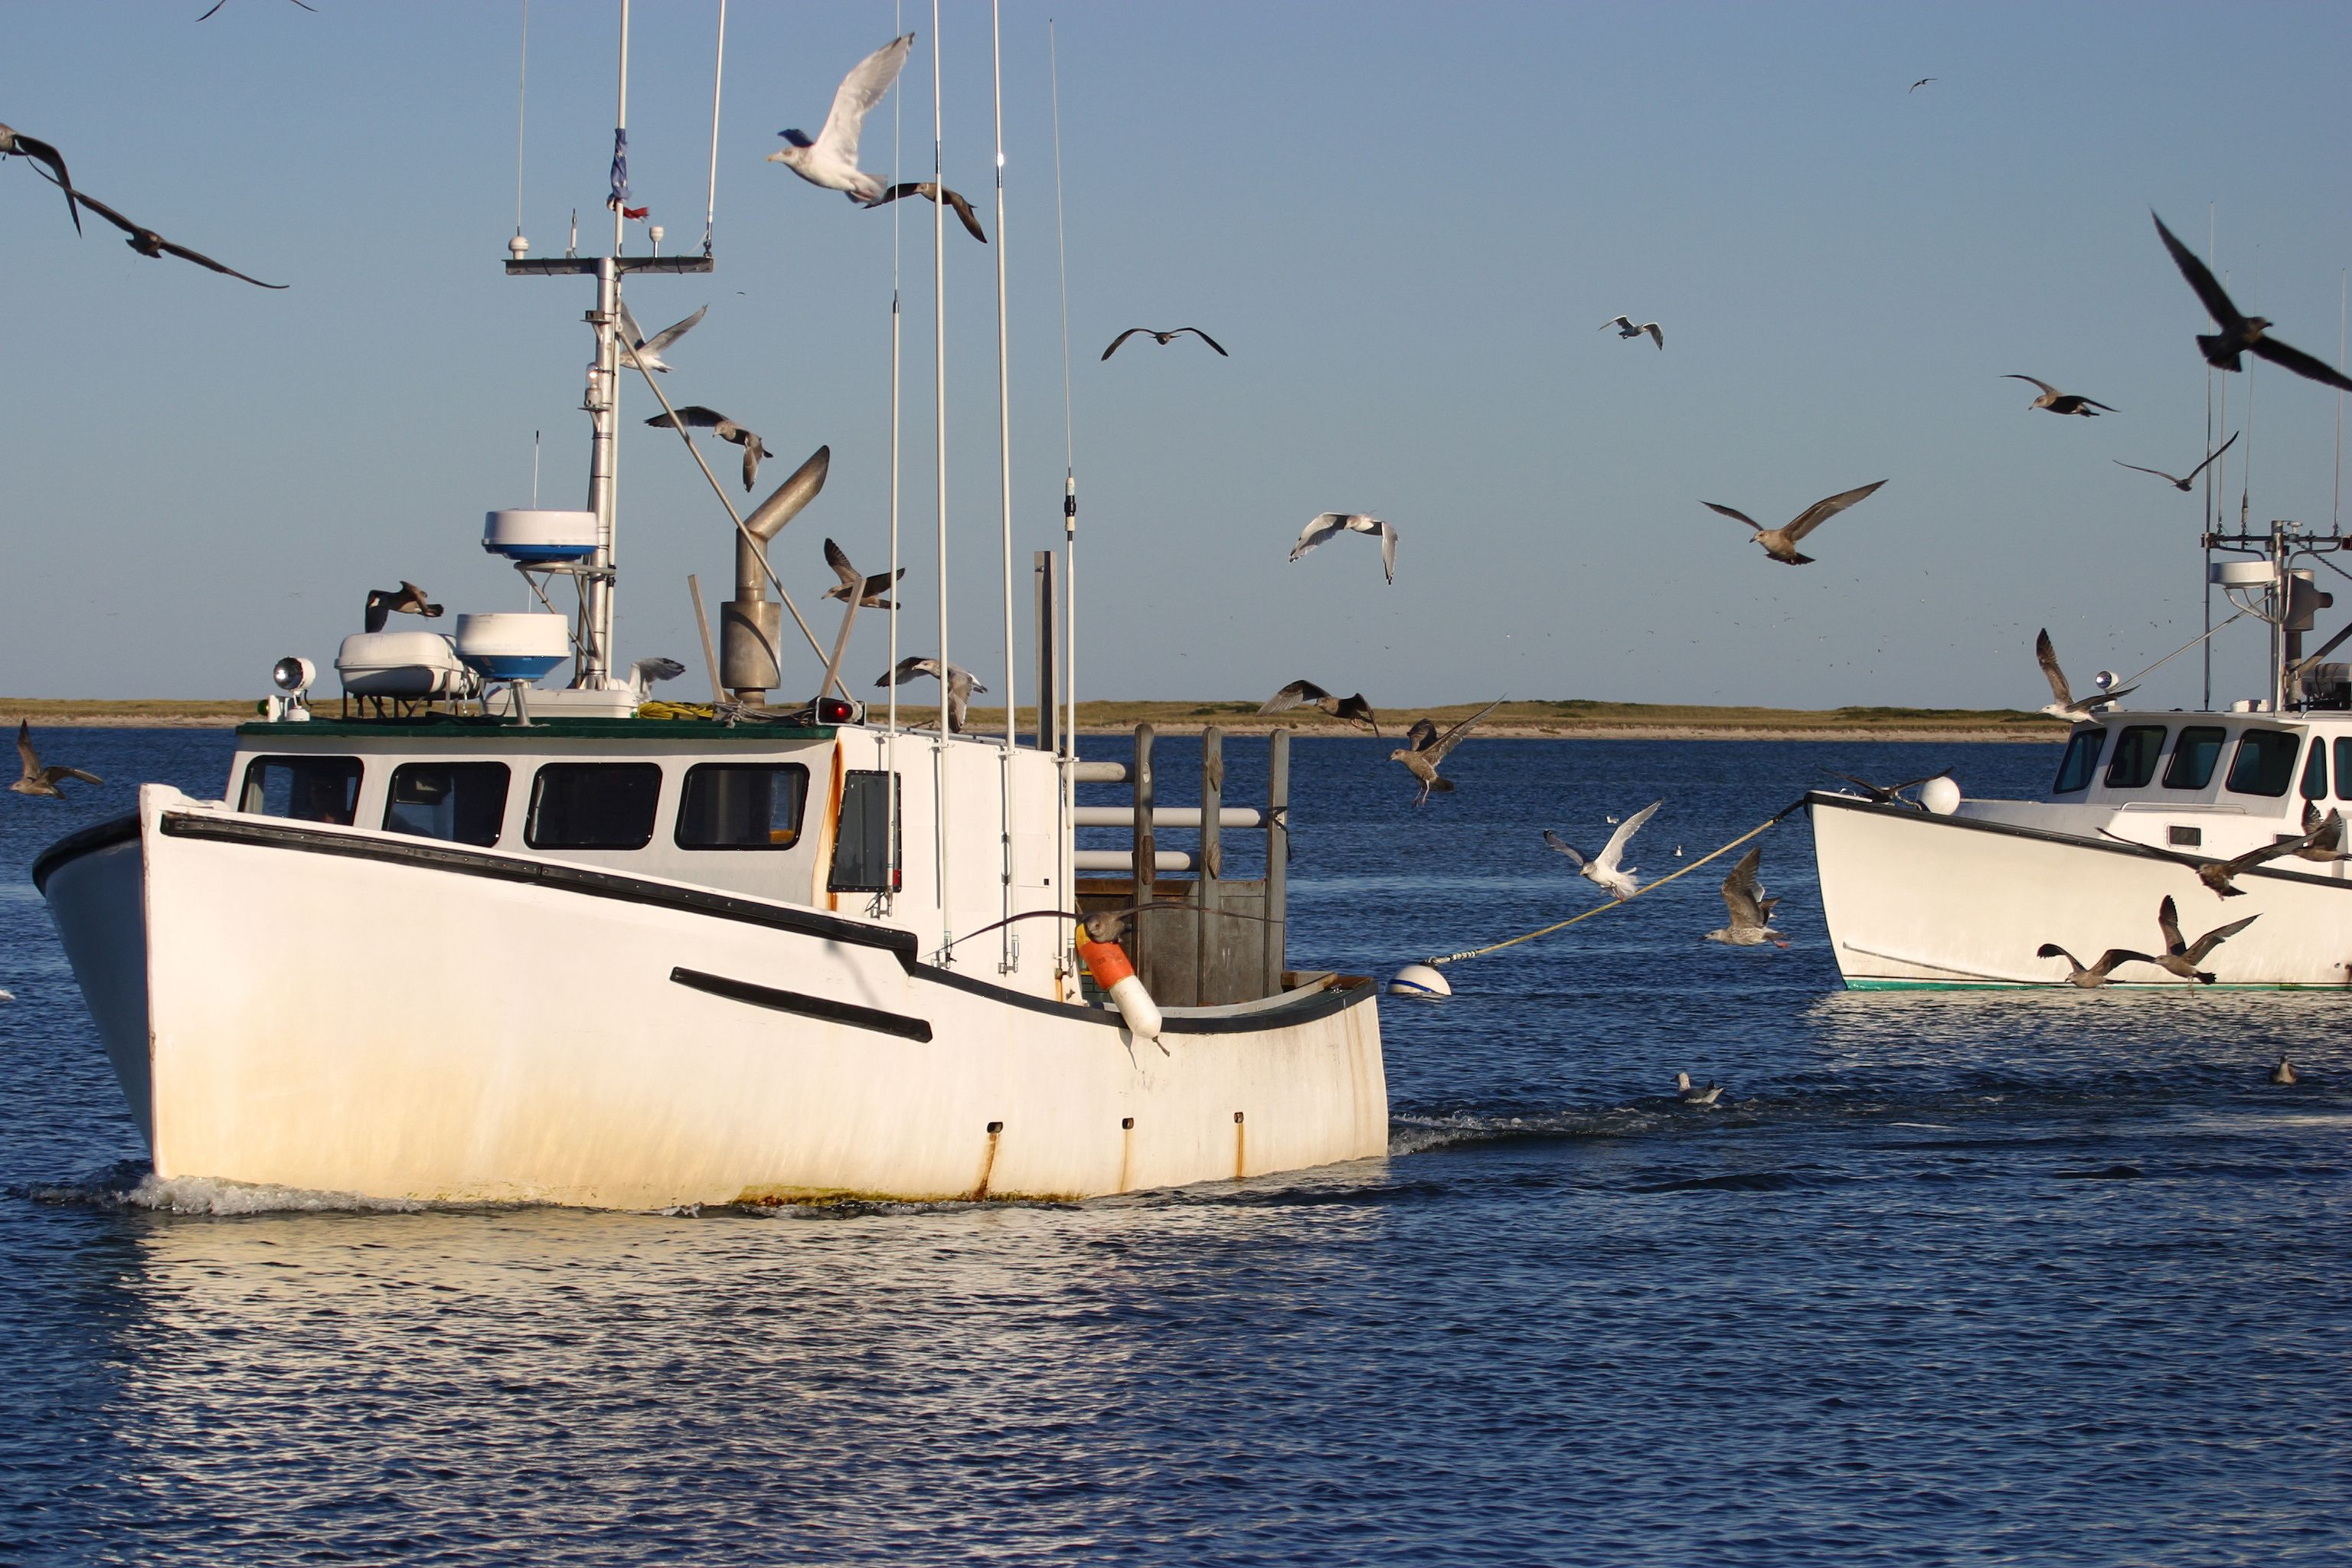 A fishing boat returning to Harbor followed by large flock of gulls. Image by Dennis W Donohue / Shutterstock. United States, undated.